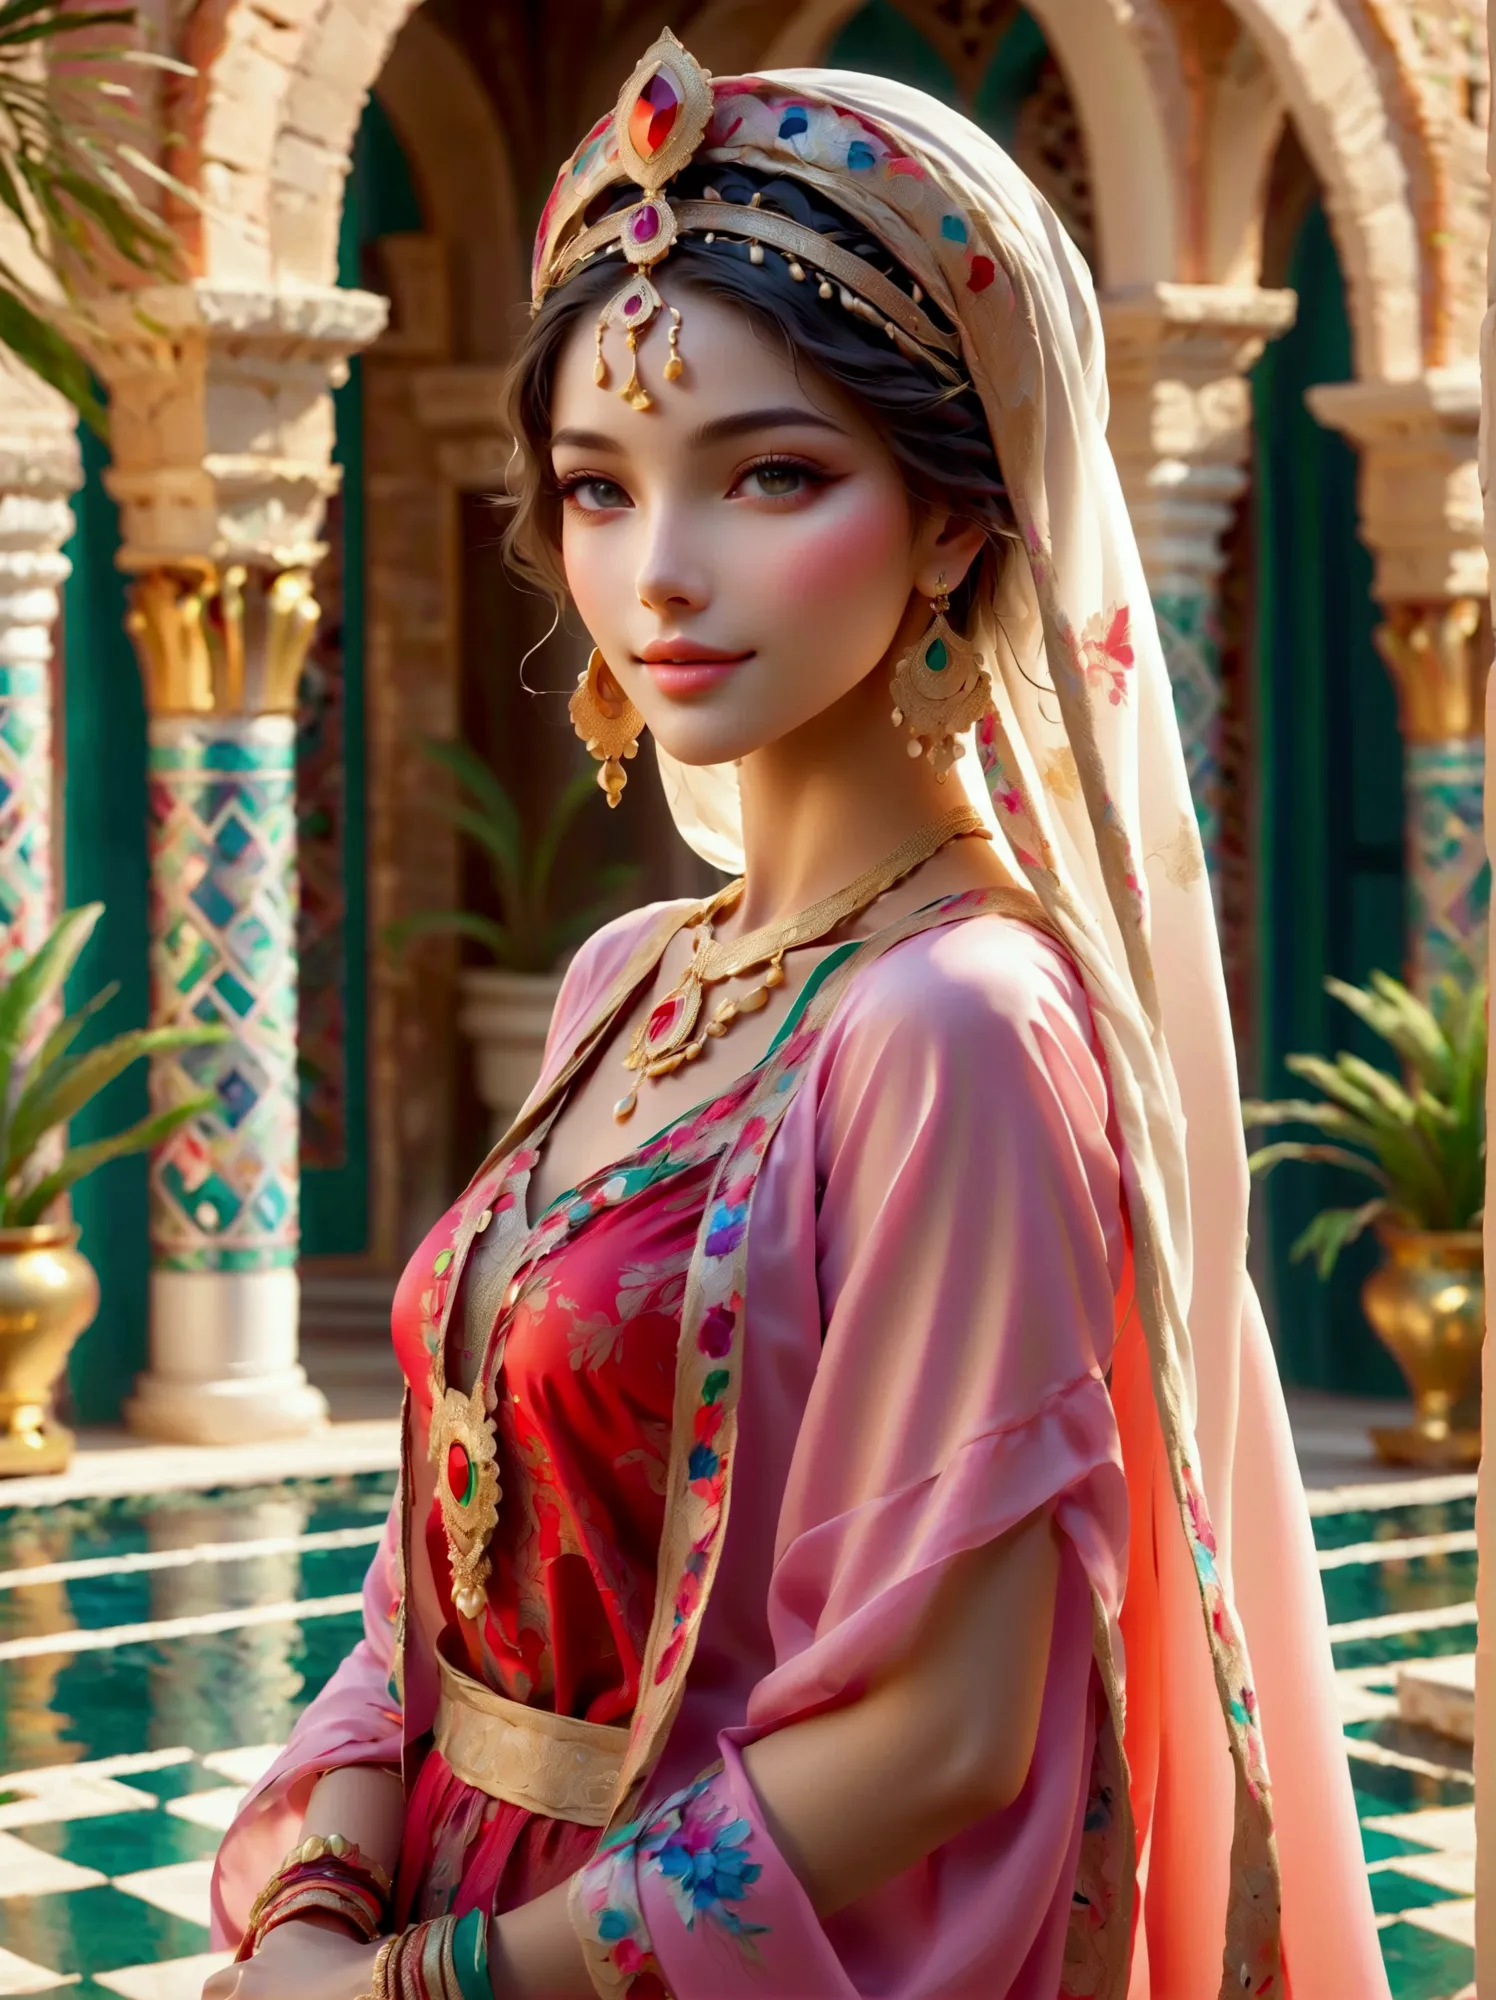 Desert Princess, Wear colorful traditional clothing, An atmosphere of magic and whimsy, Similar to the setting of an animation p...